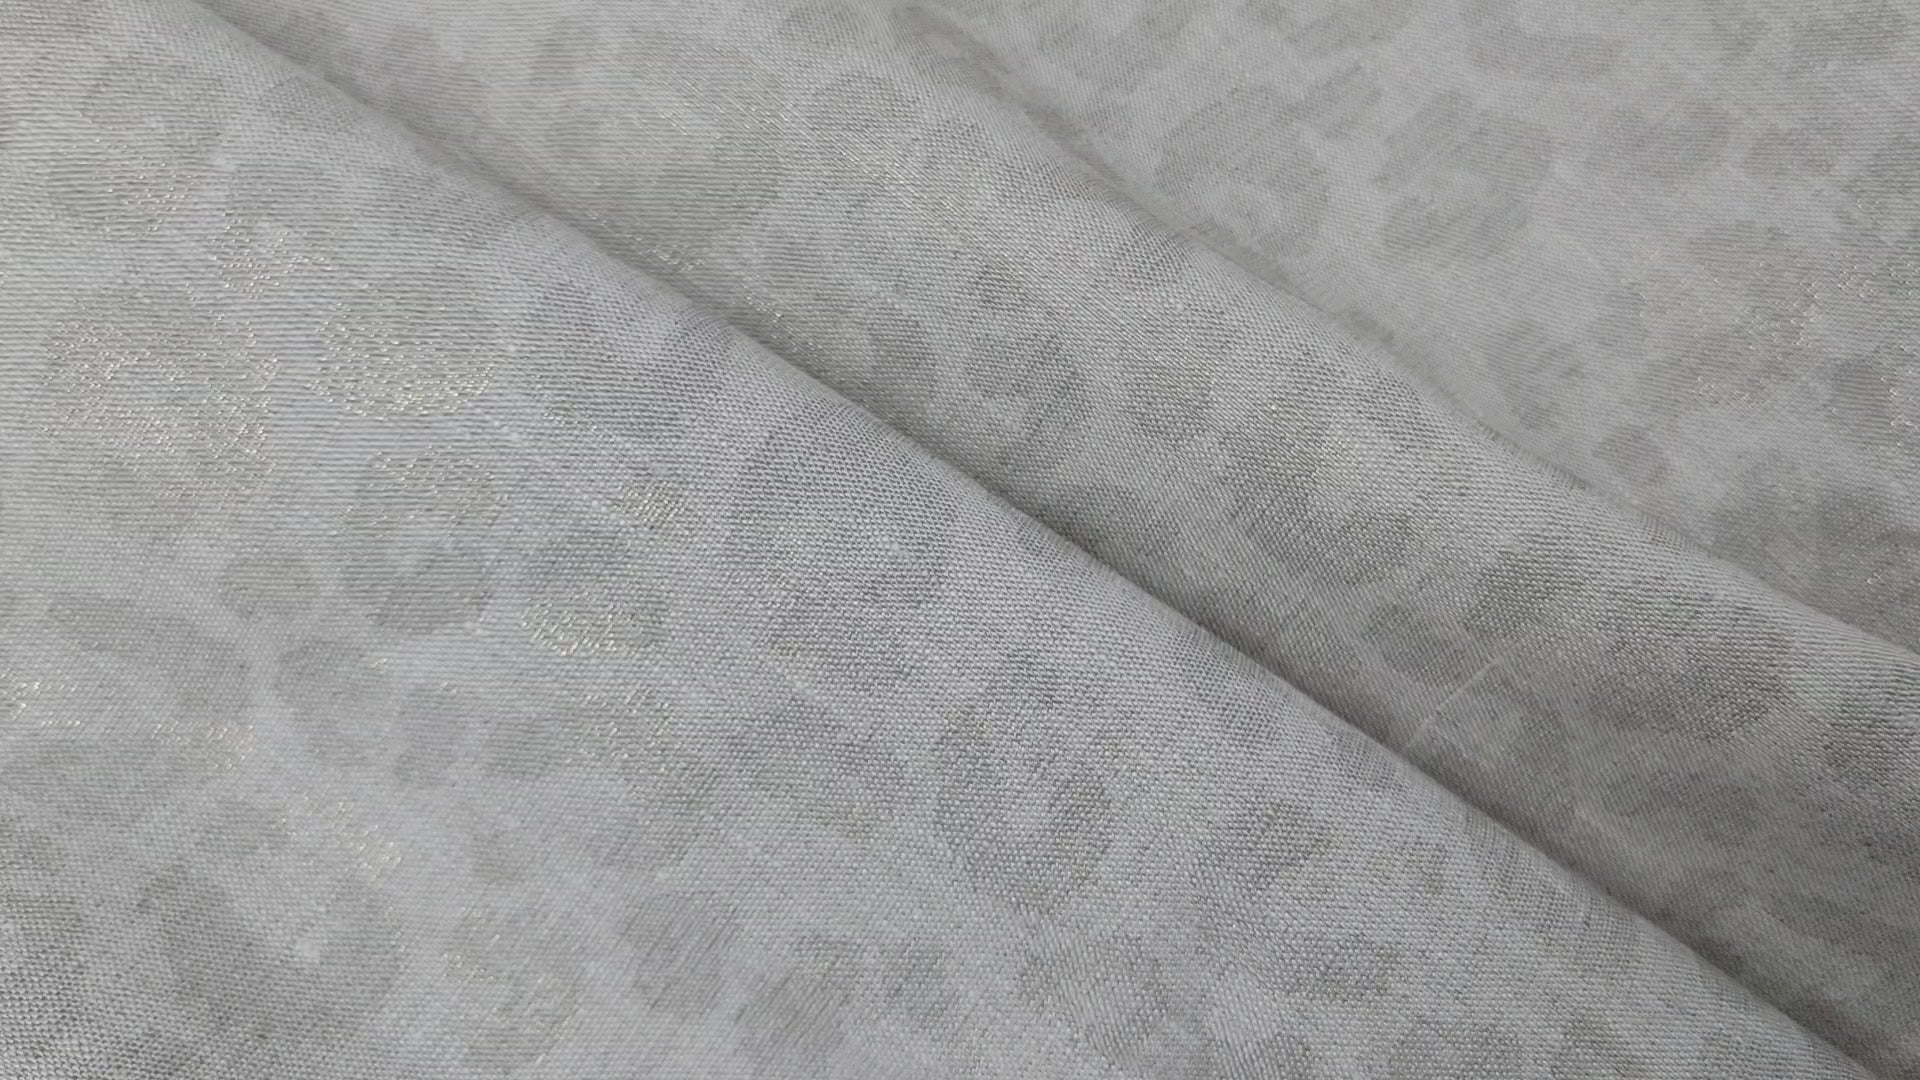 Luxe Safari Elegance: 100% Linen Fabric in Natural Hue with Gold Foil Leopard Print